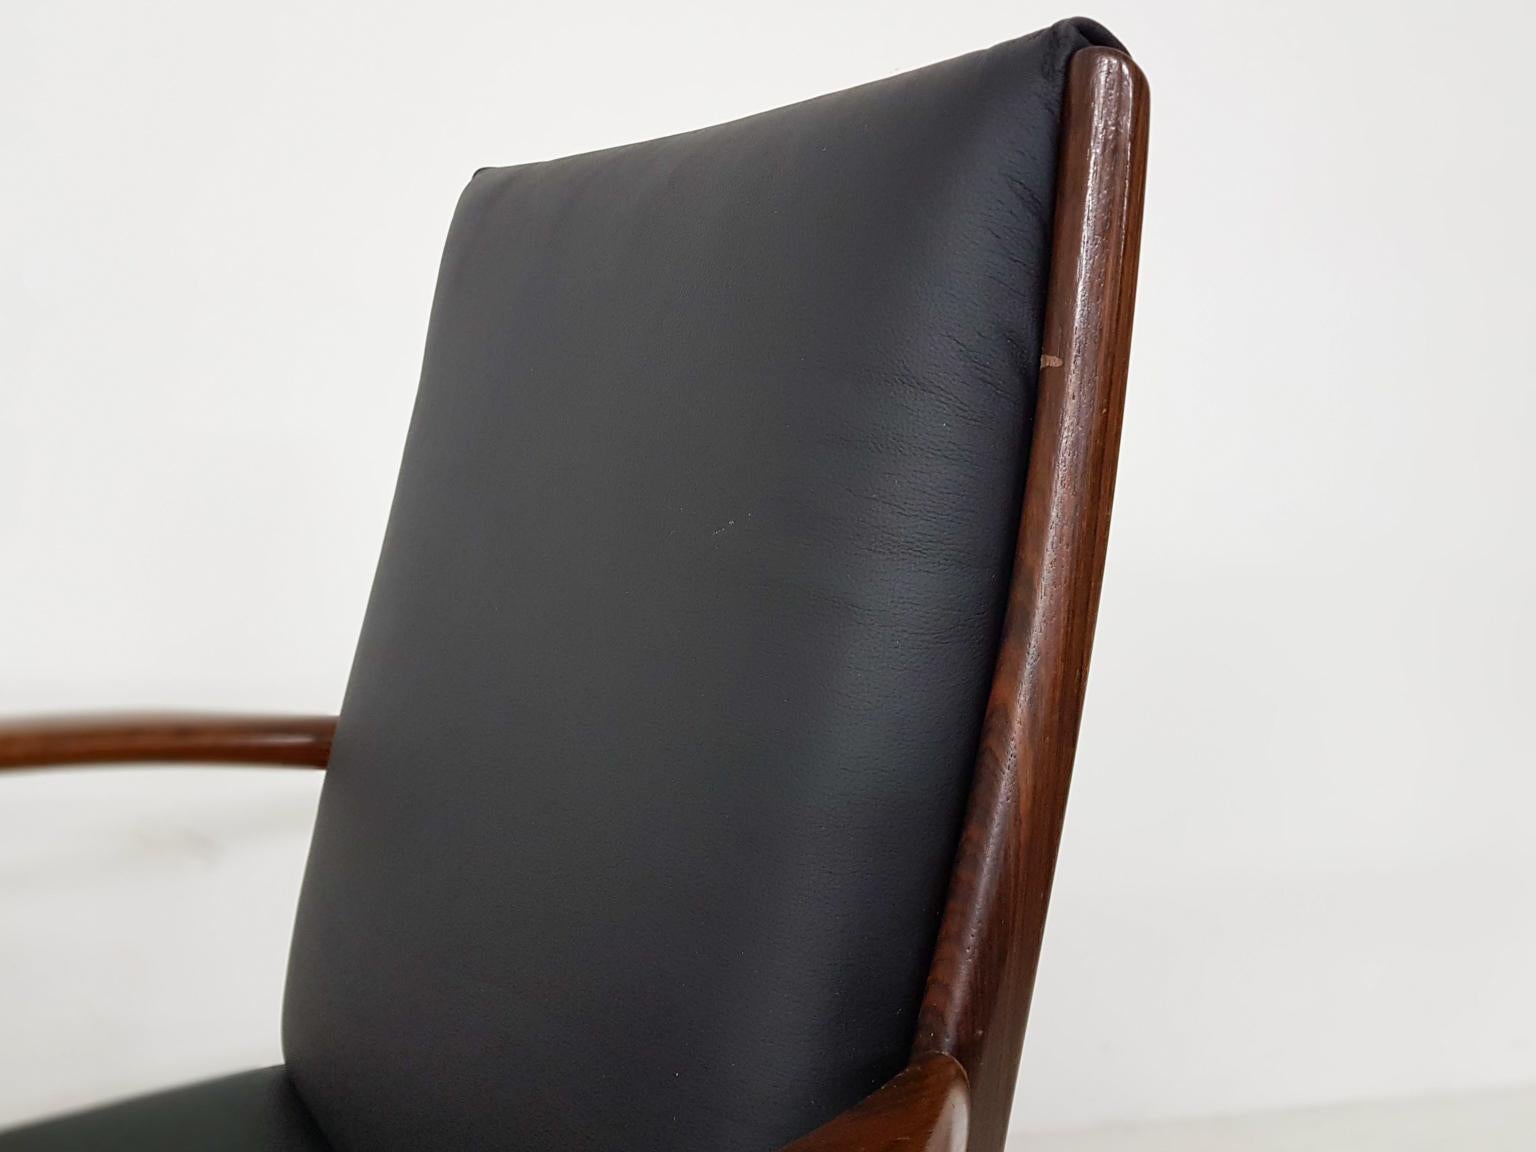 Set of 4 Rosewood and Black Leather Dining Chairs, Danish Modern, 1950s For Sale 1